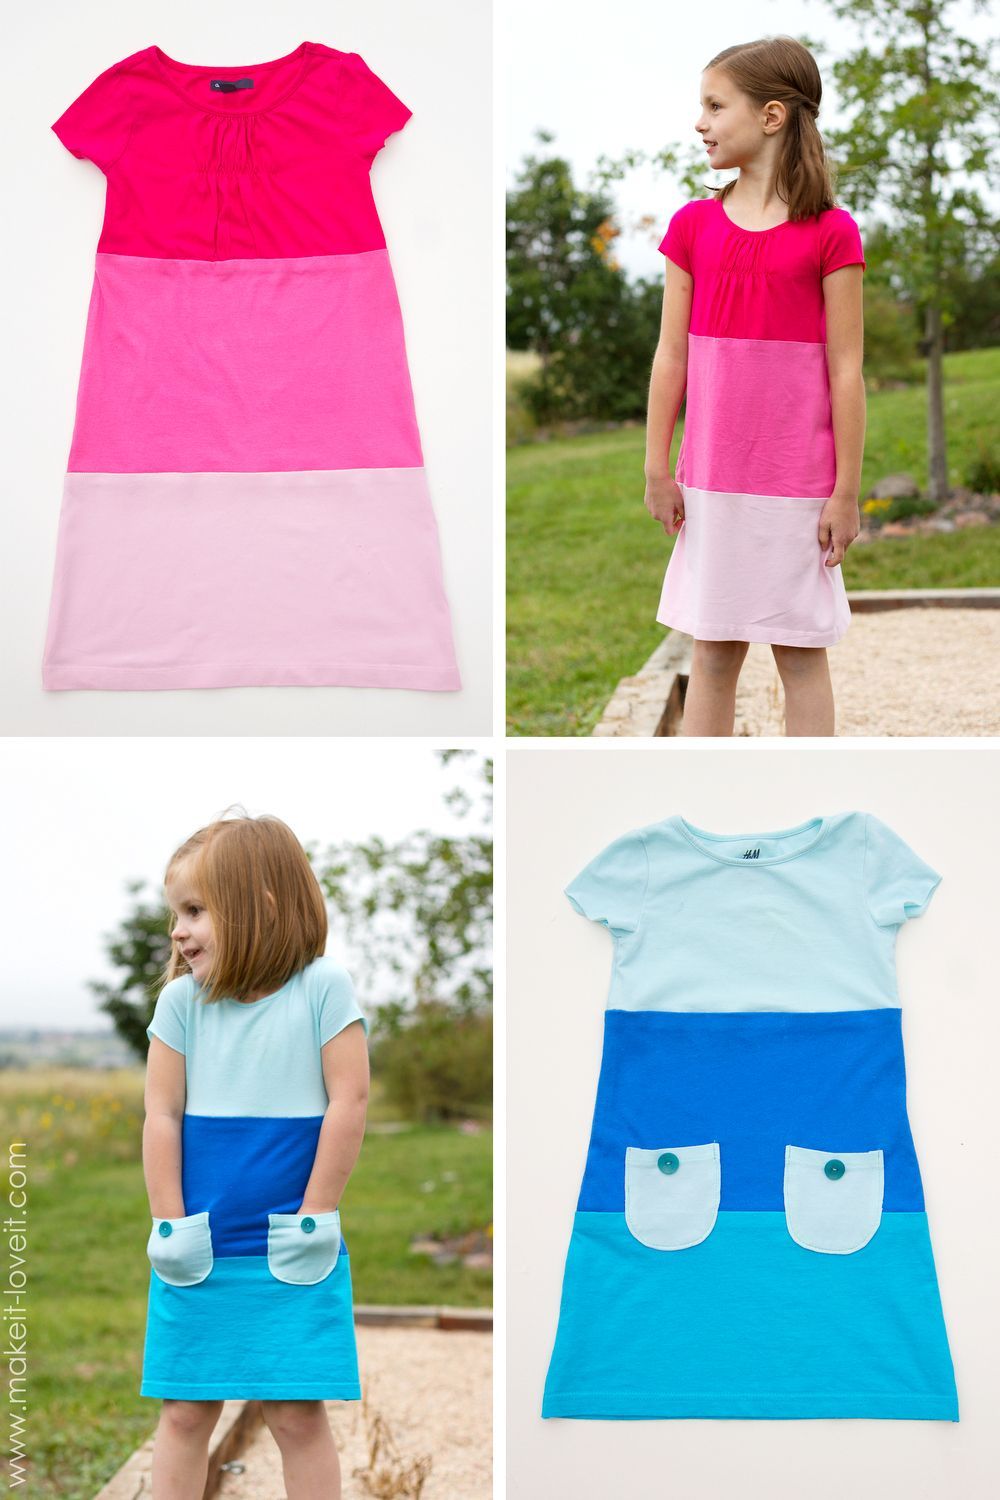 Make a Color-Block Dress with pockets (…from old Tshirts) — Make It and Love It